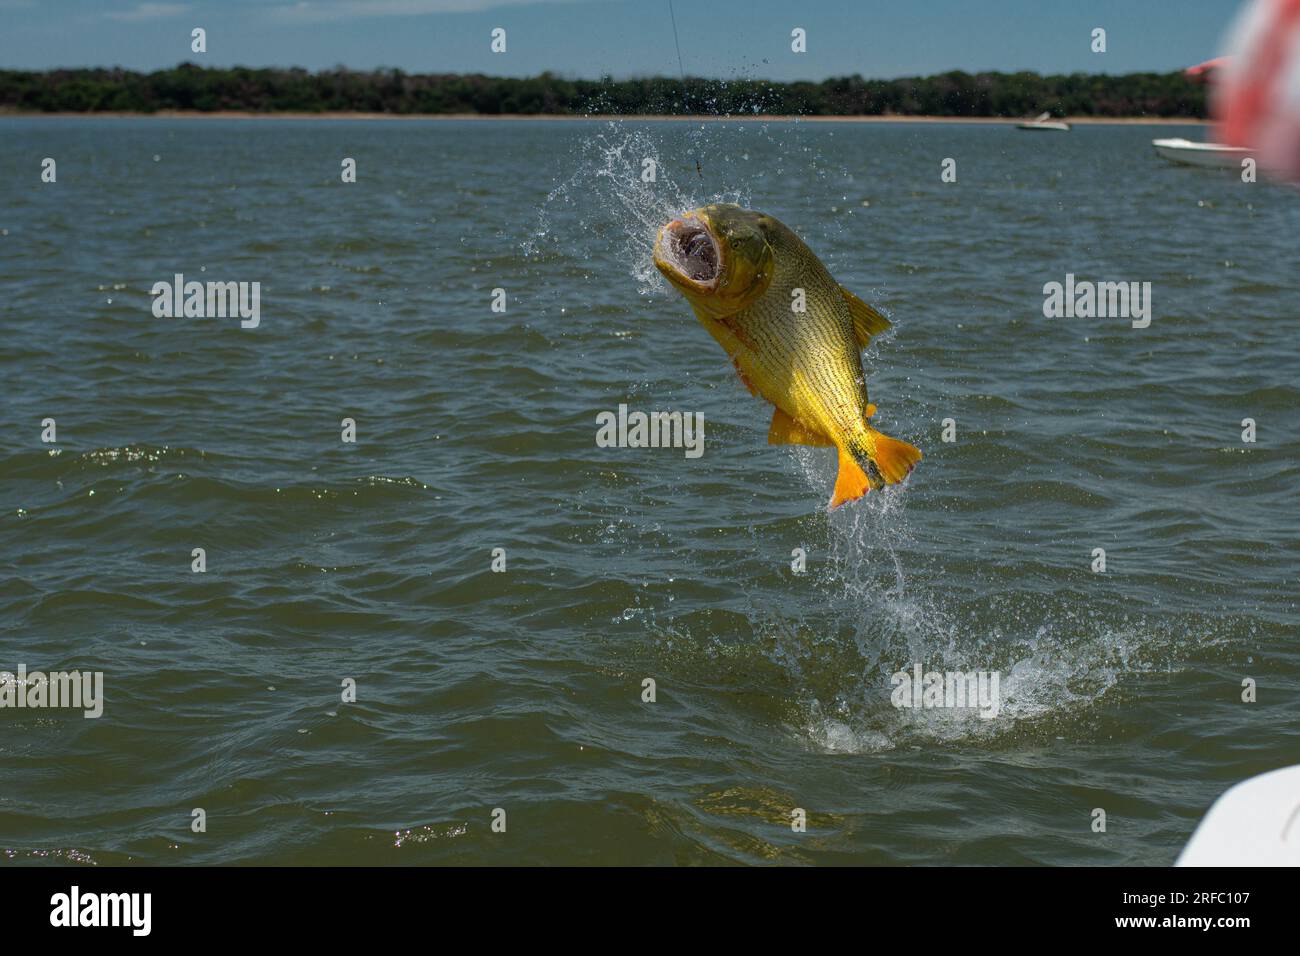 Big golden dorado (Salminus brasiliensis) jumping off the water during a catch on a fishing day. Stock Photo